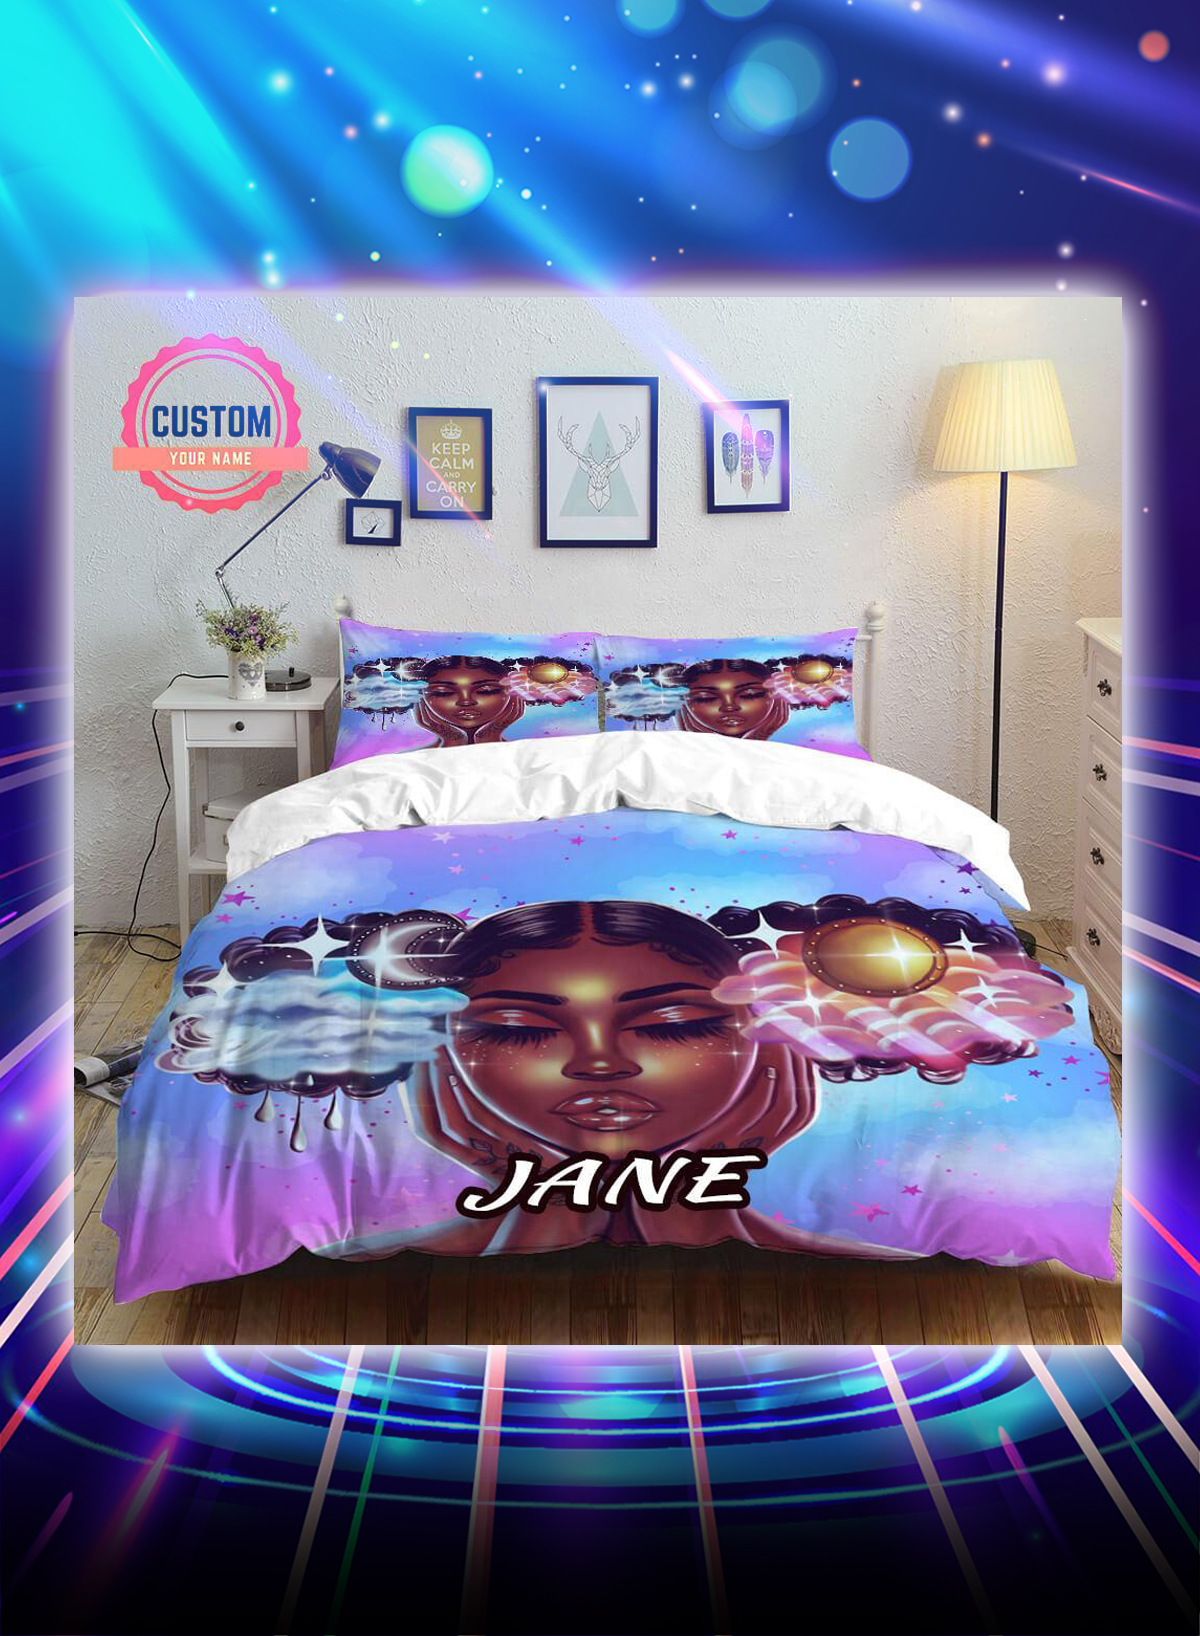 Sun and moon beautiful black girl personalized custom name bed set